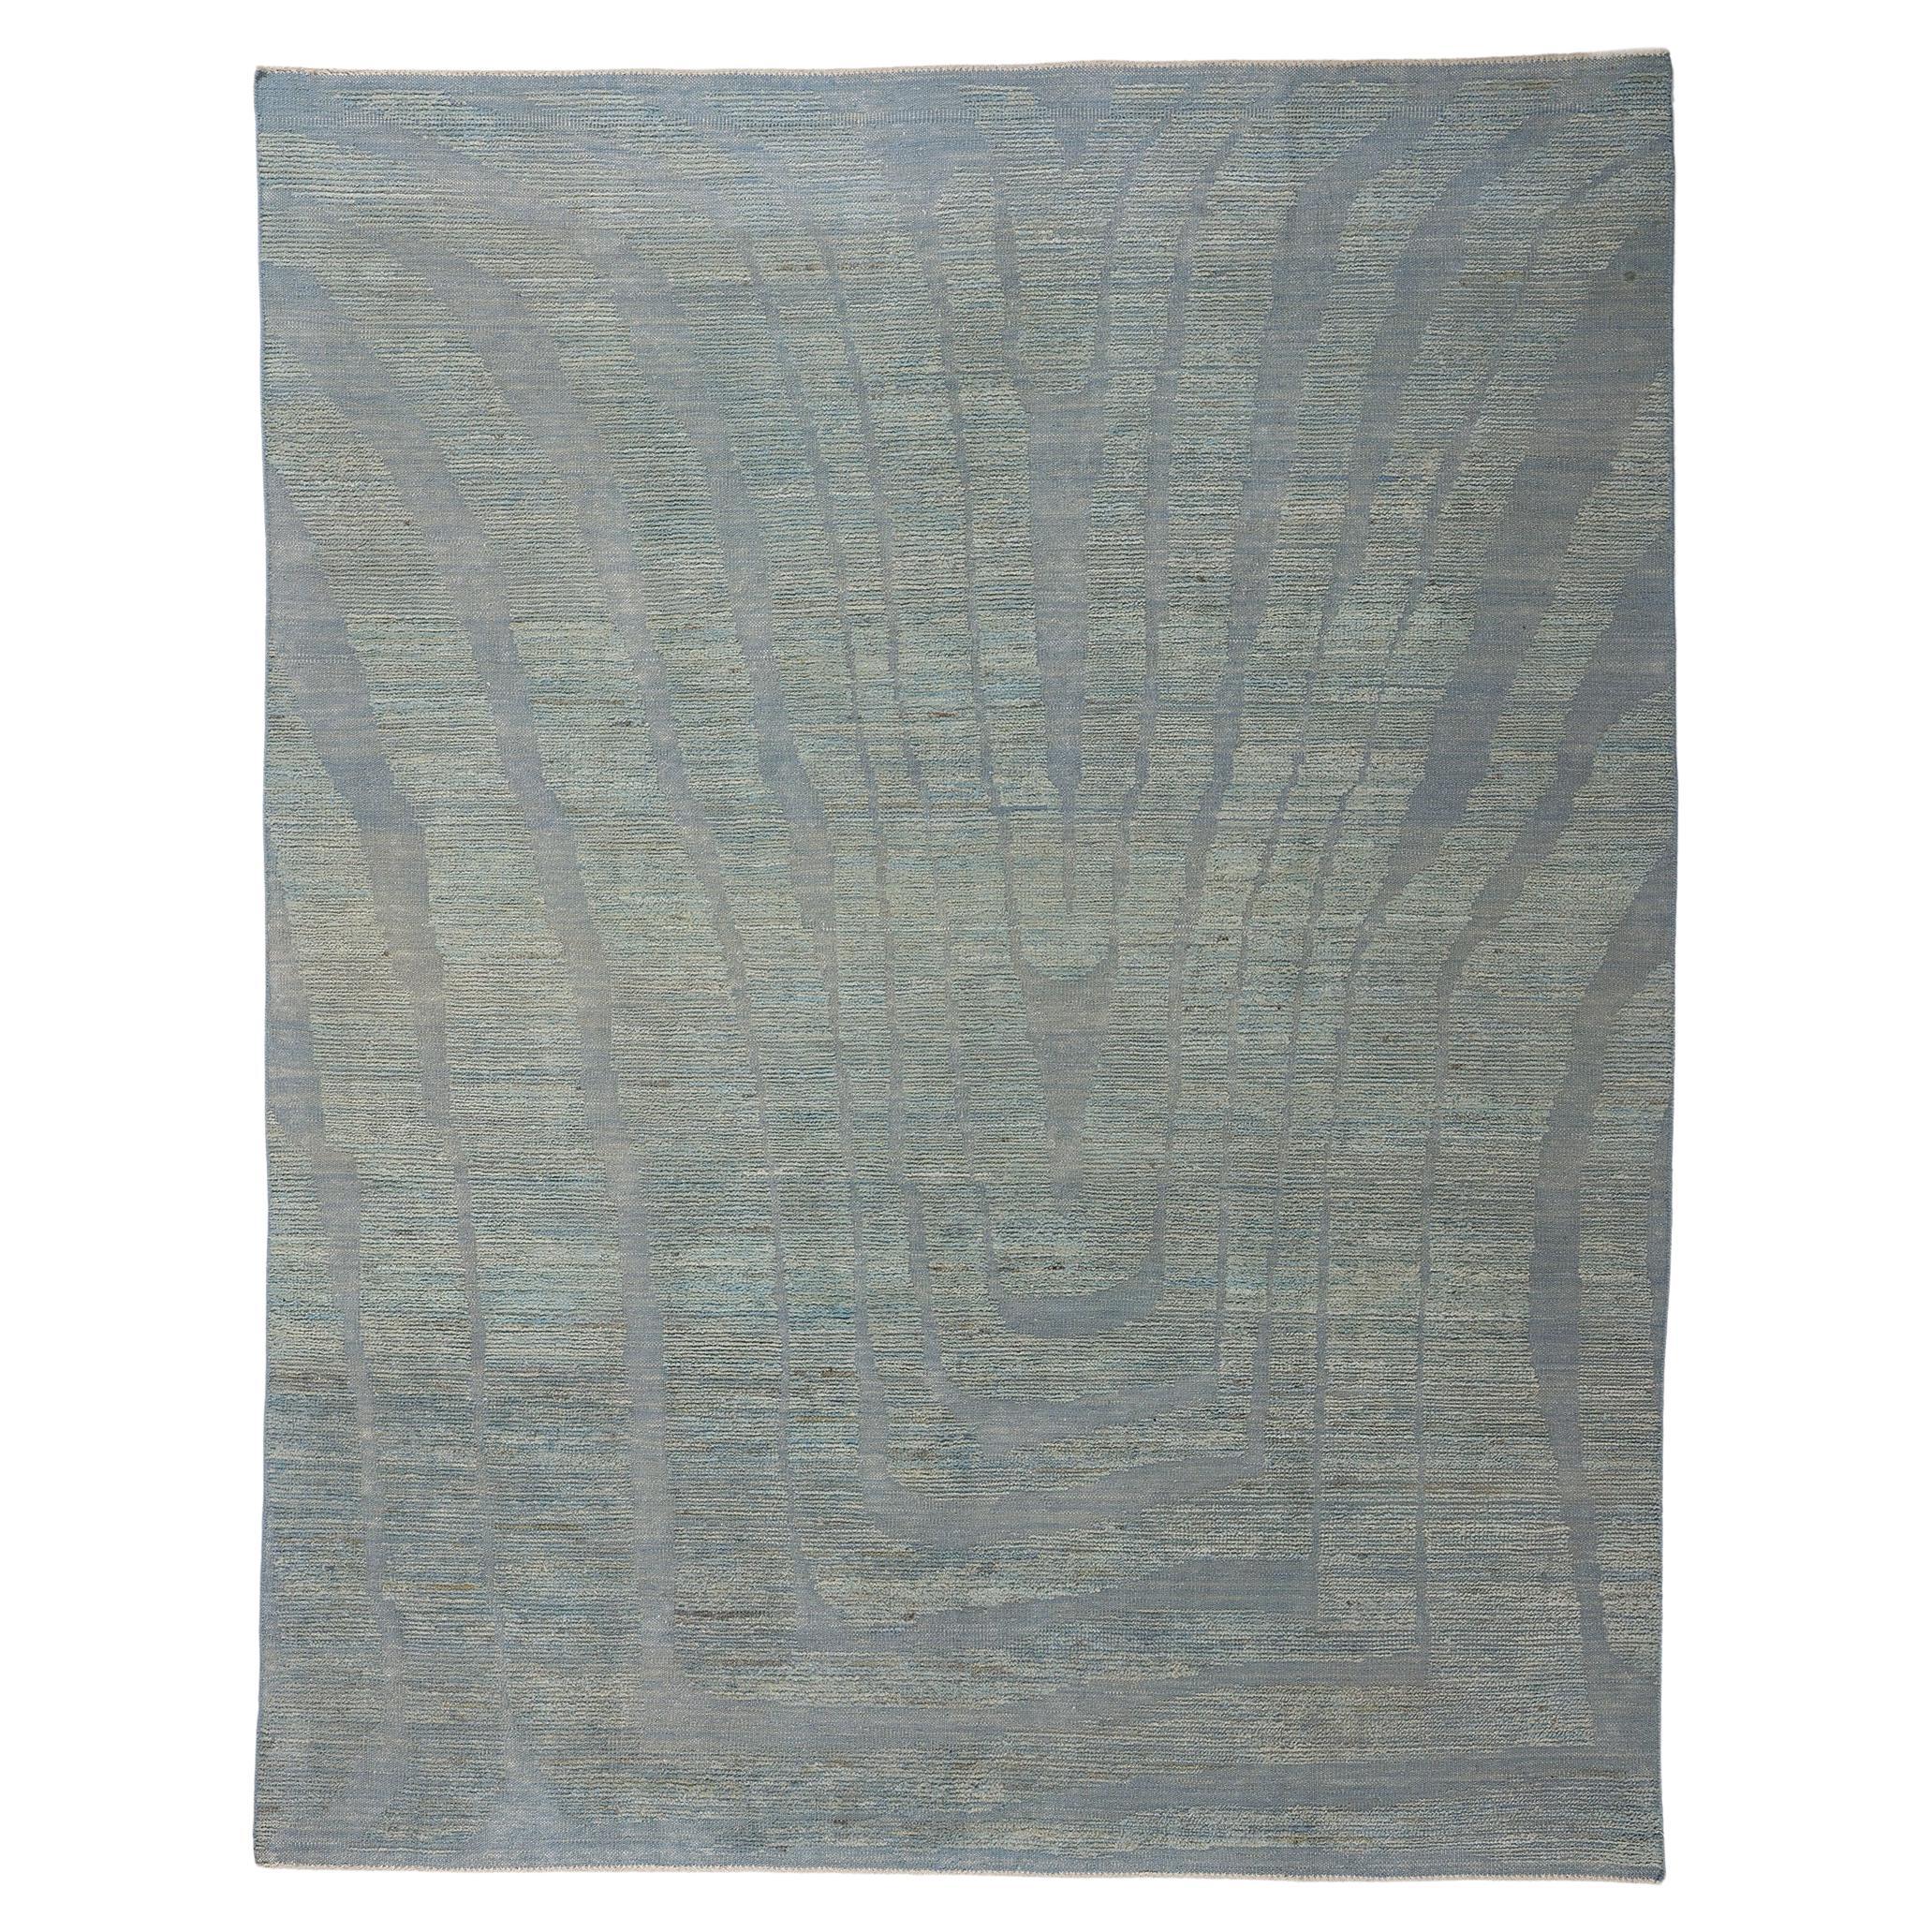 New Blue Moroccan High and Low Wool Pile Biophilic Rug For Sale